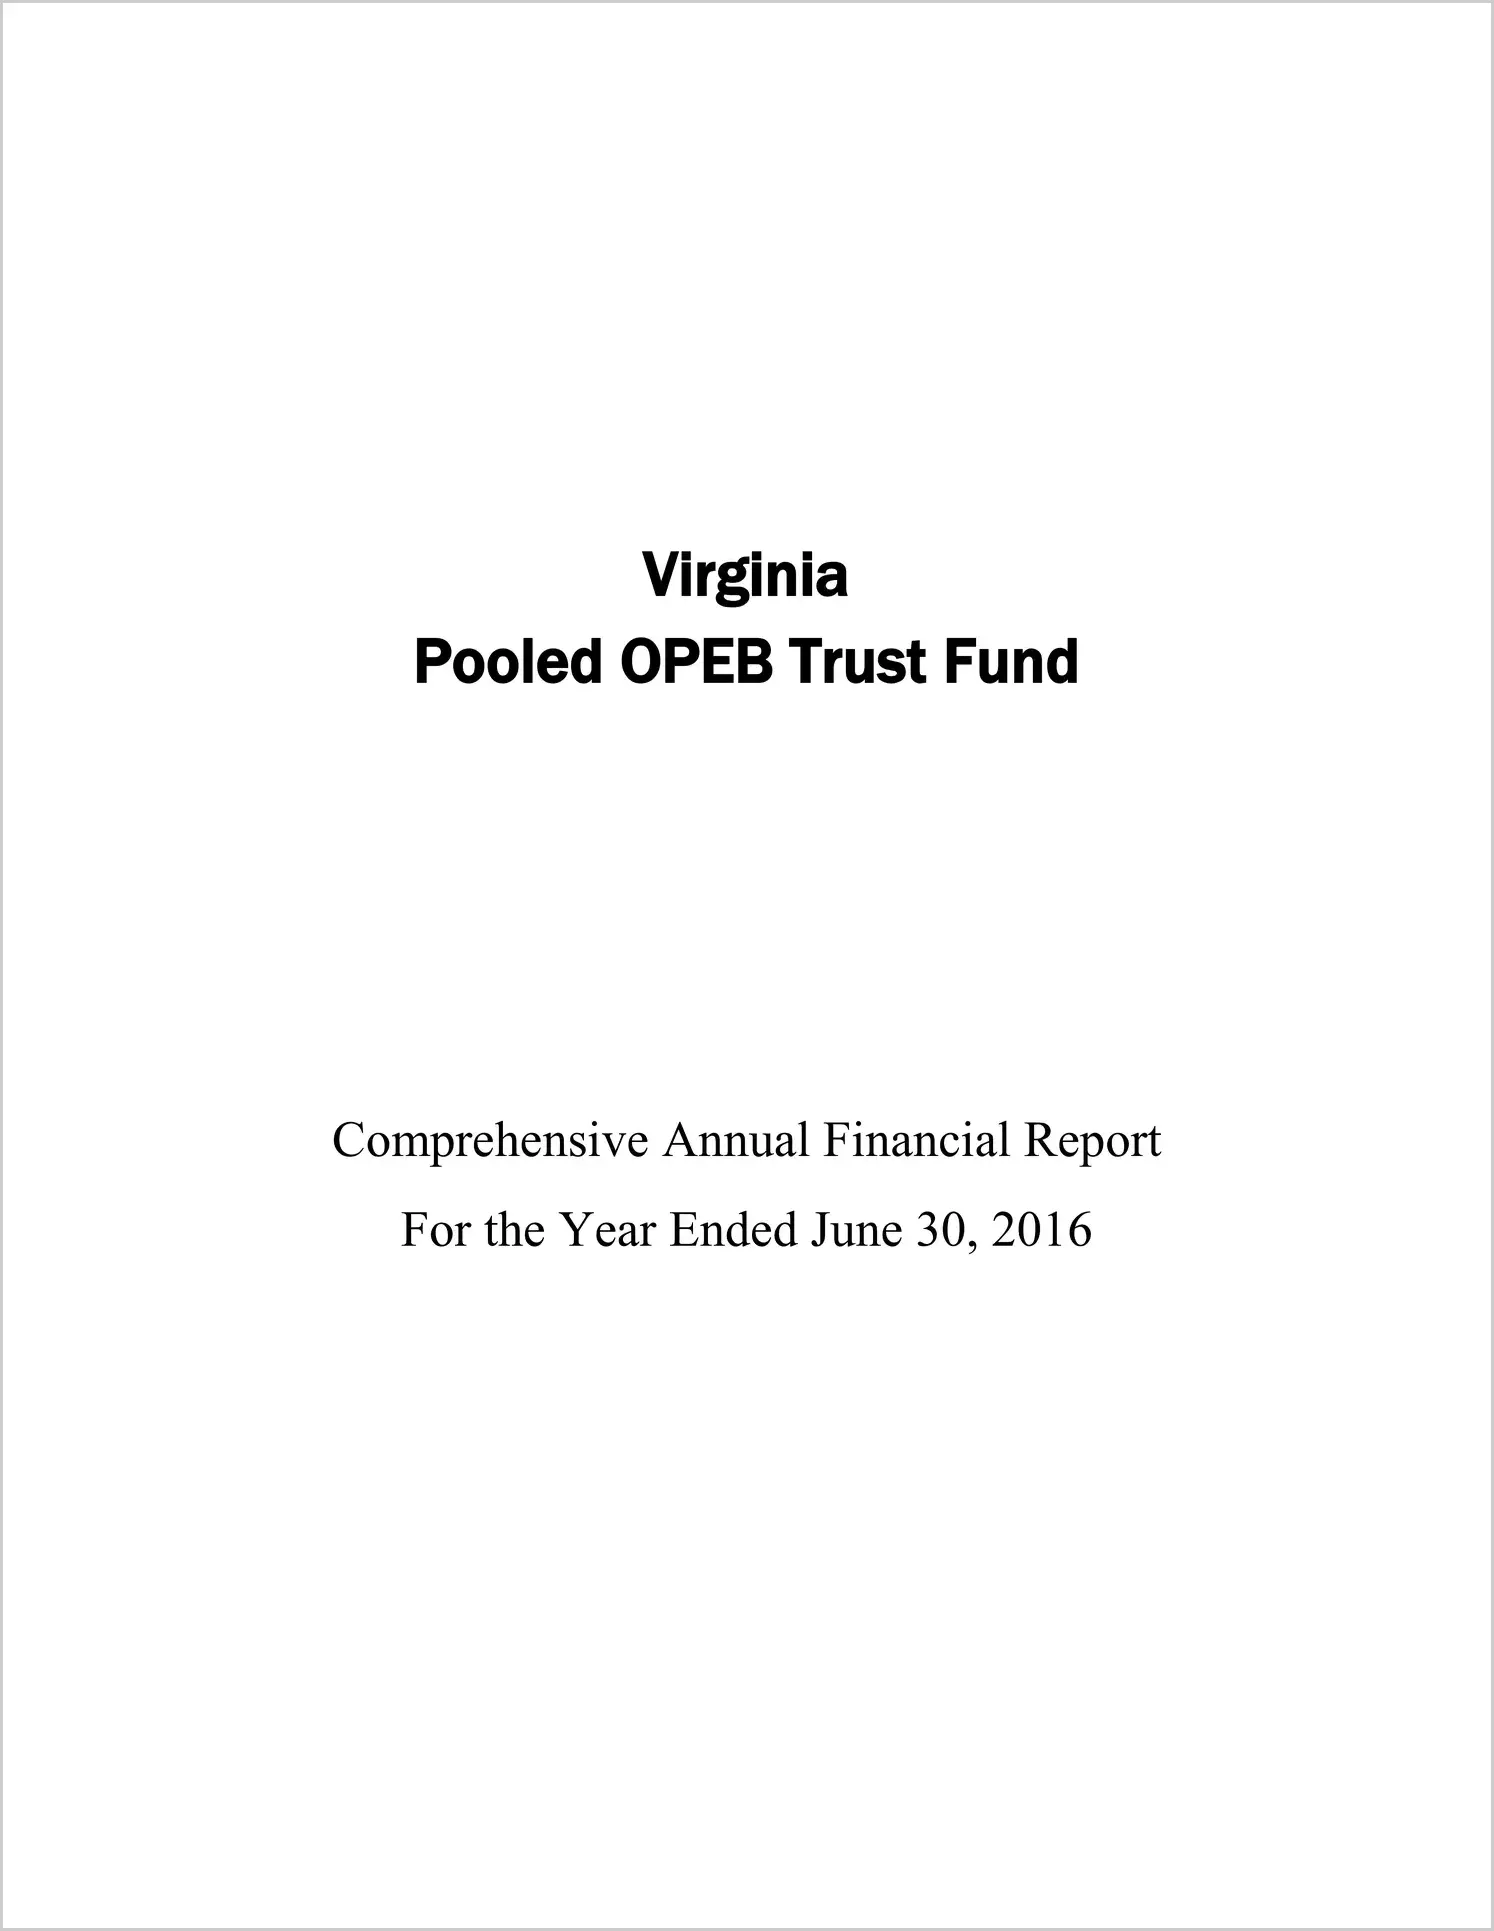 2016 ABC/Other Annual Financial Report  for Virginia Pooled OPEB Trust Fund